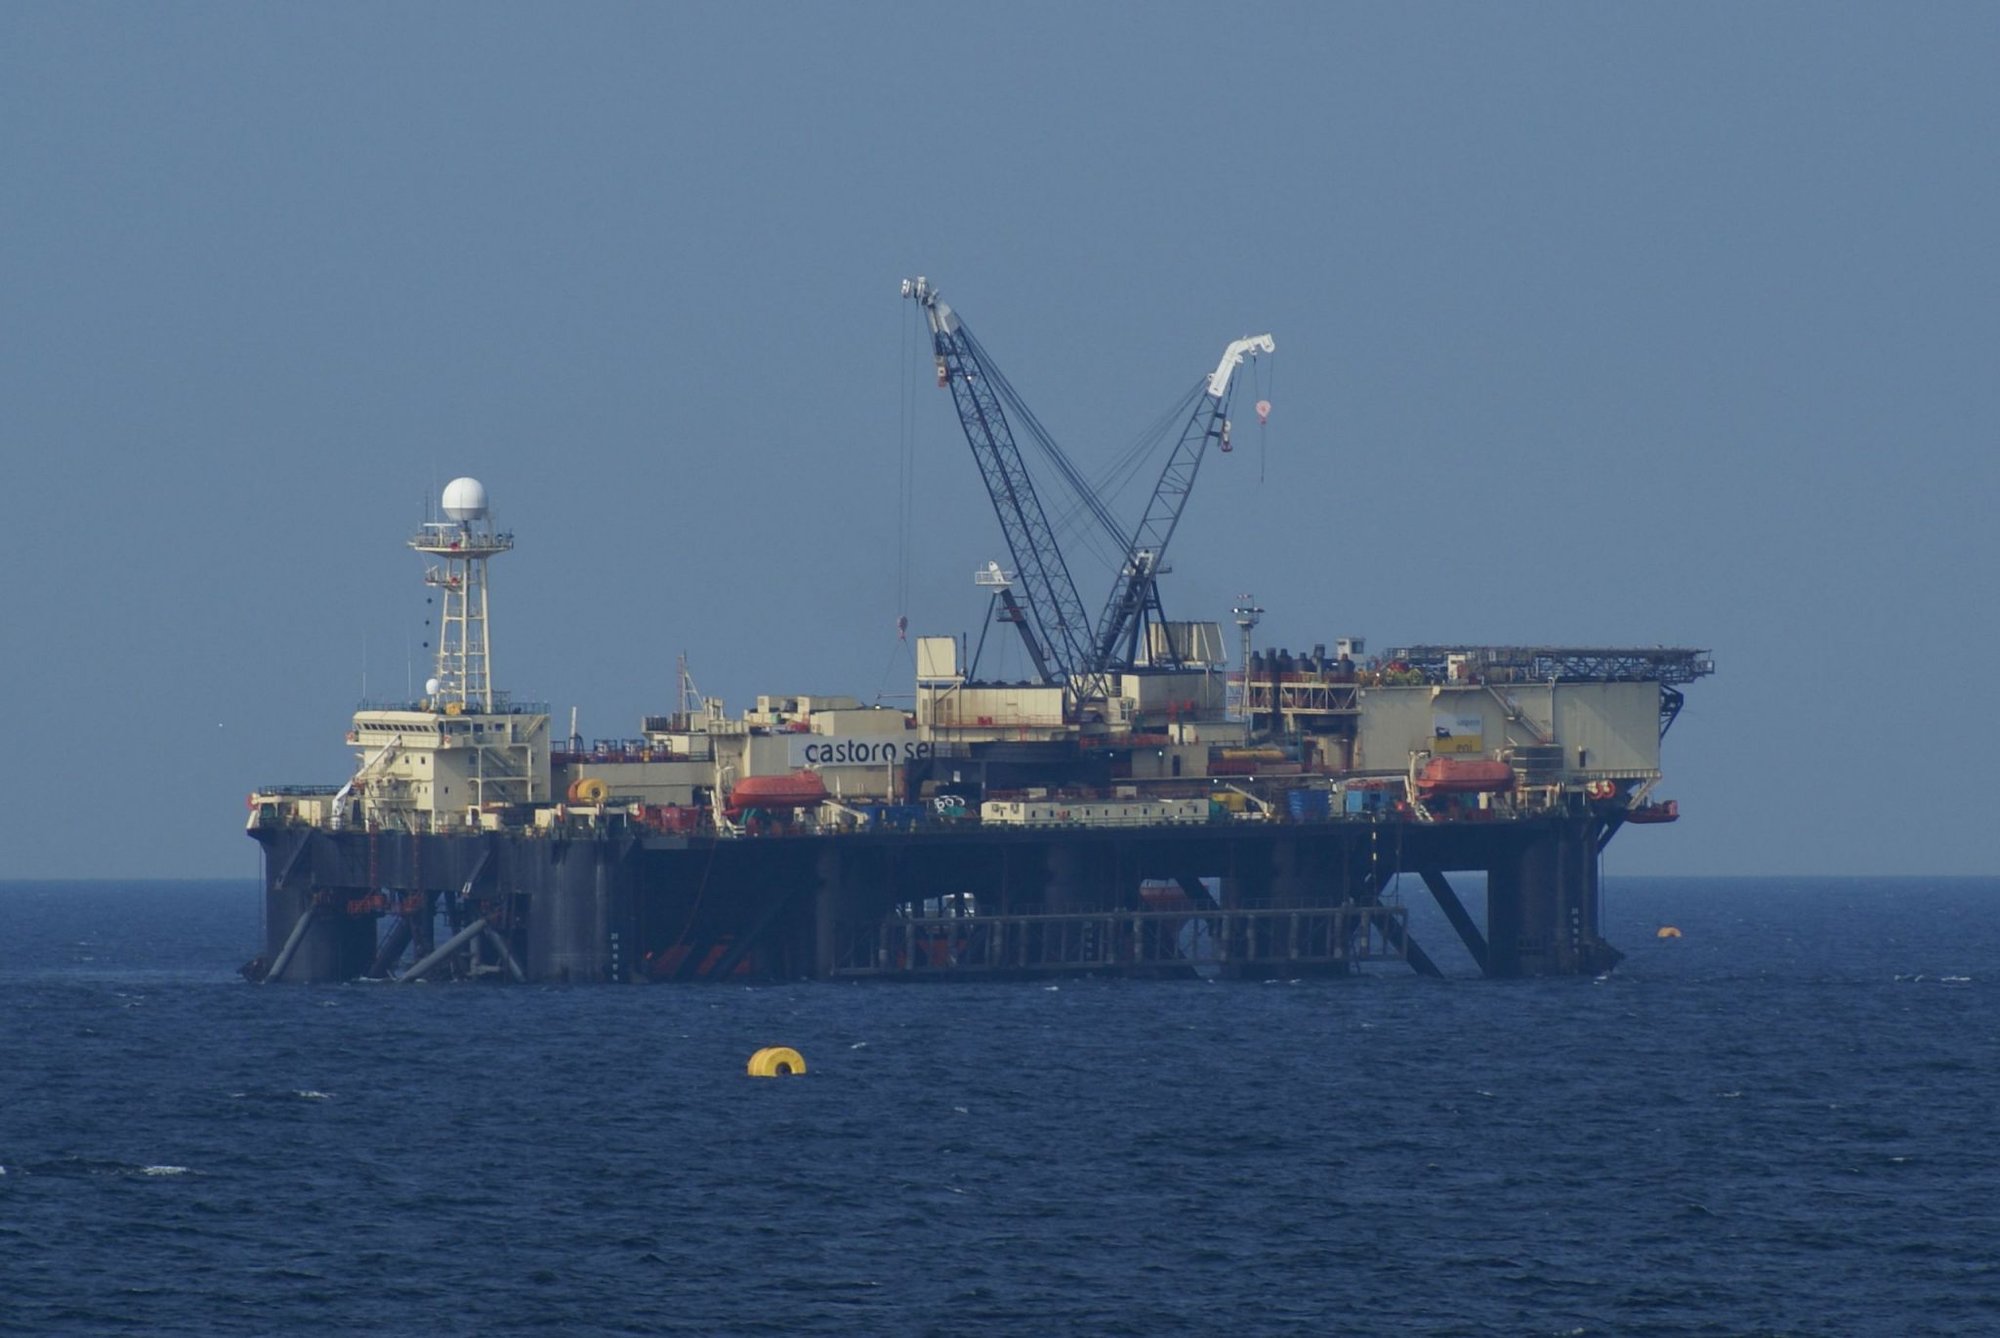 The semi-submersible pipe-laying vessel Castoro Sei operating for Nord Stream in the Baltic Sea south-east of Gotland, Sweden in late March 2011. Photo by Philfaebuckie via Wikimedia Commons.